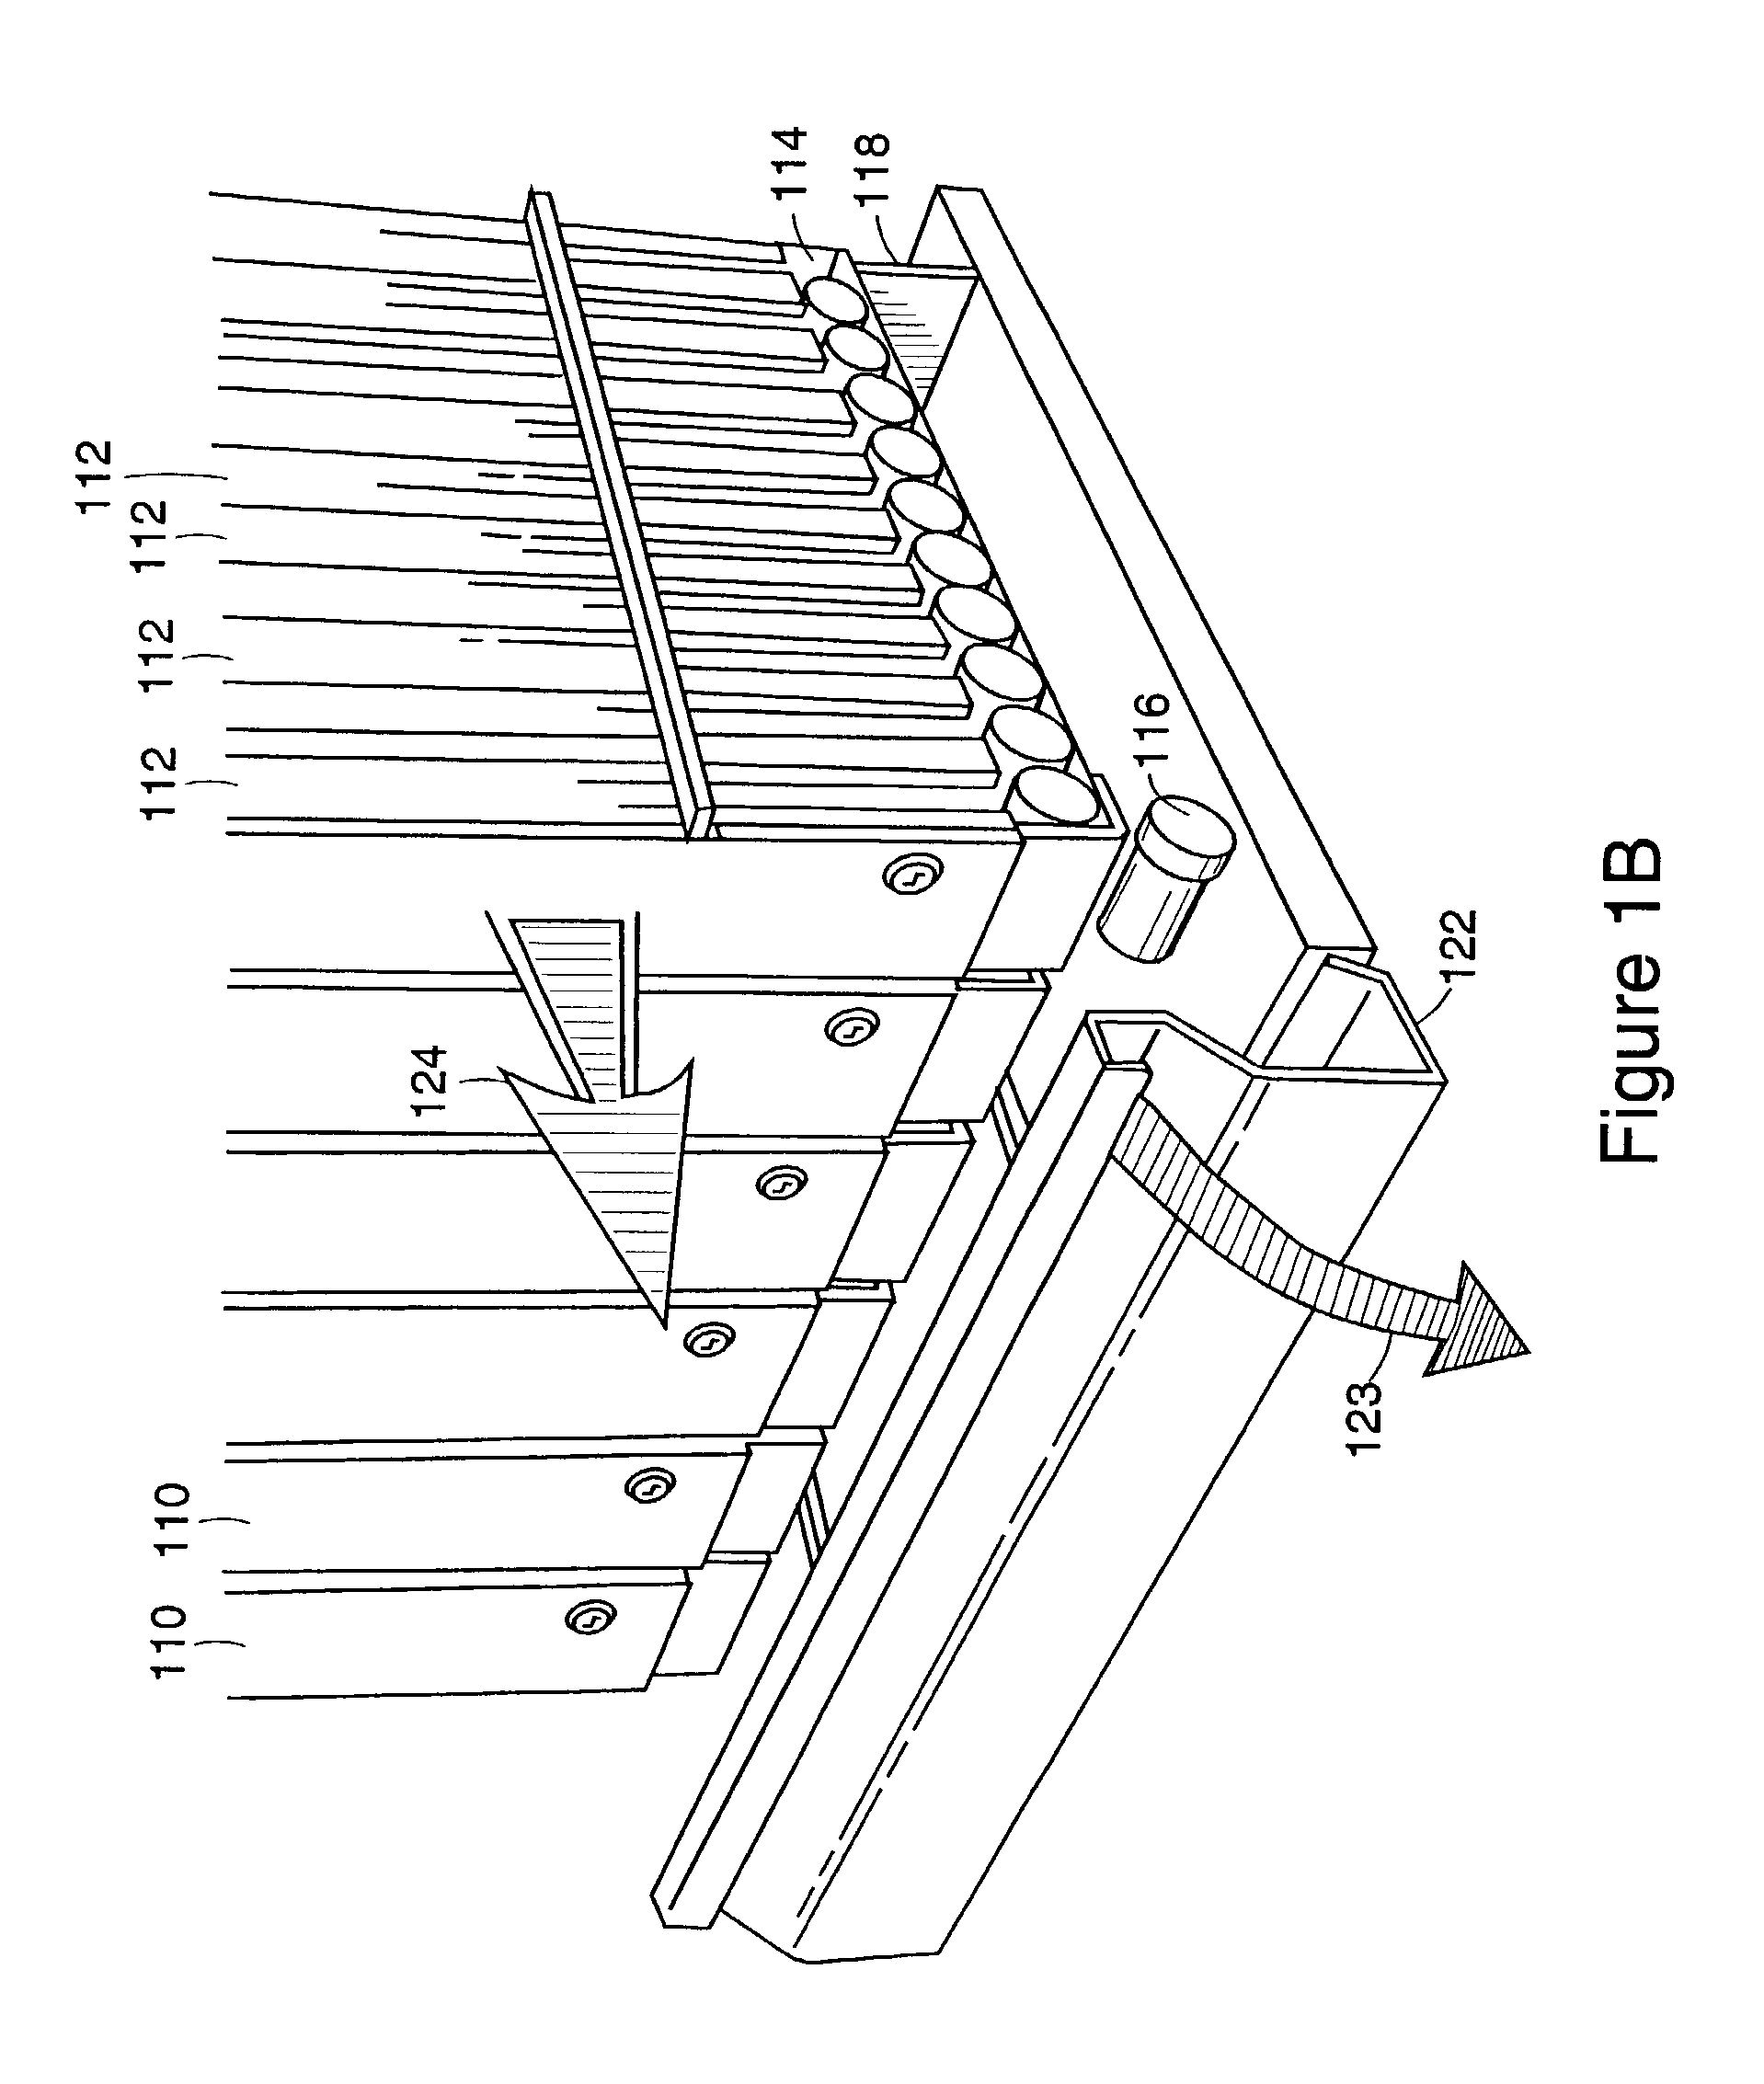 Systems for dispensing medical products